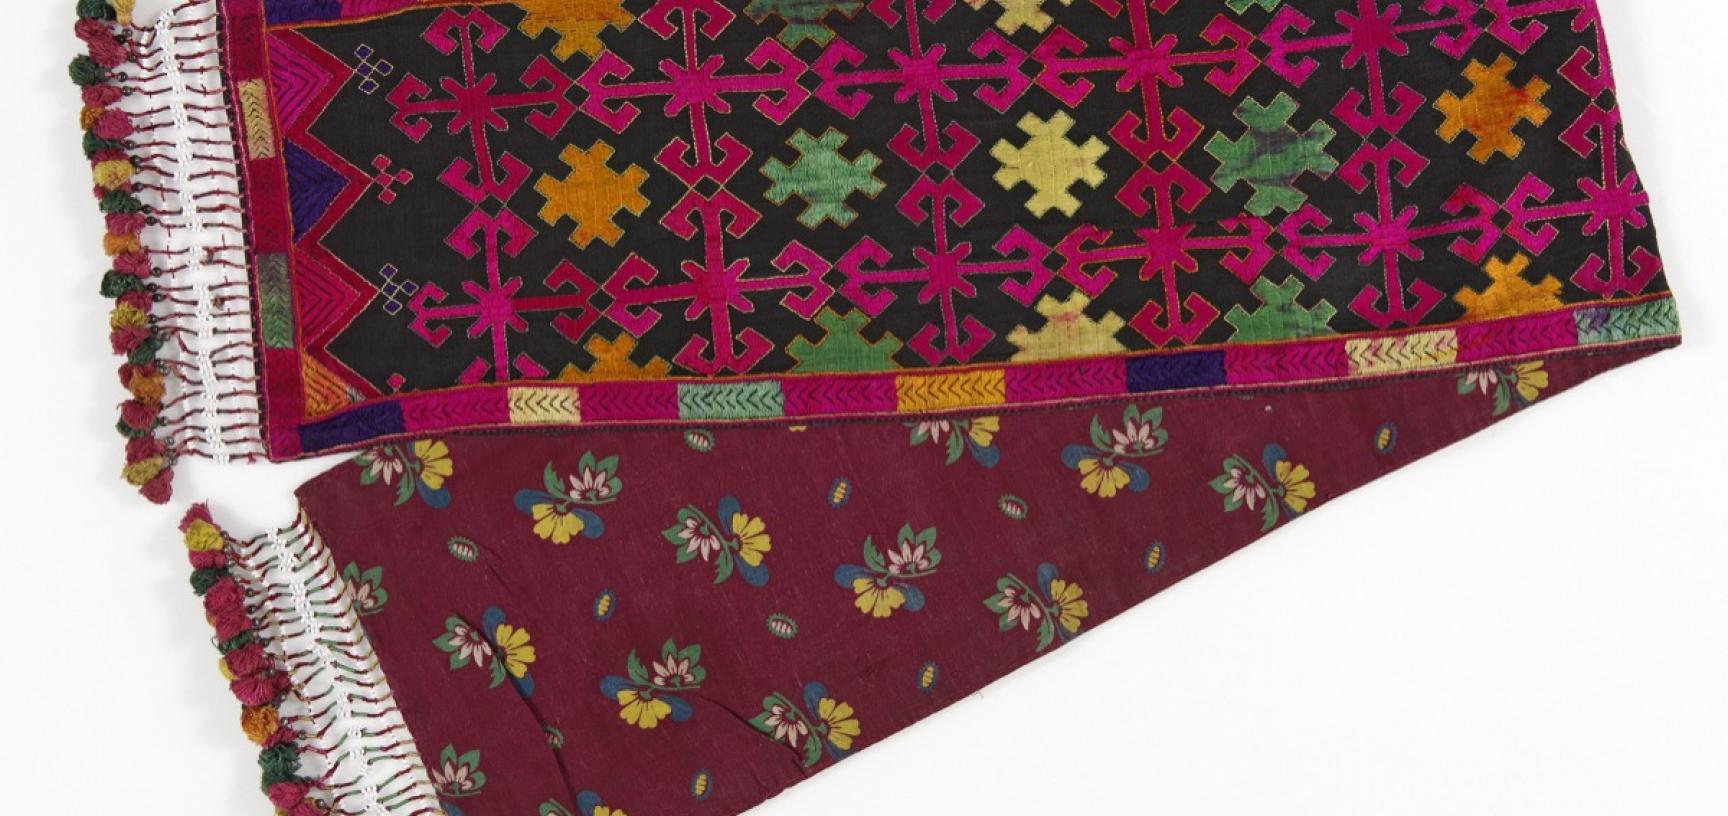 Man’s scarf. Sherakot, Kohistan, Pakistan. This scarf is embroidered in coloured silks in the style typical of Swat Kohistan. (Copyright Pitt Rivers Museum, University of Oxford. Accession Number: 2008.116.7)